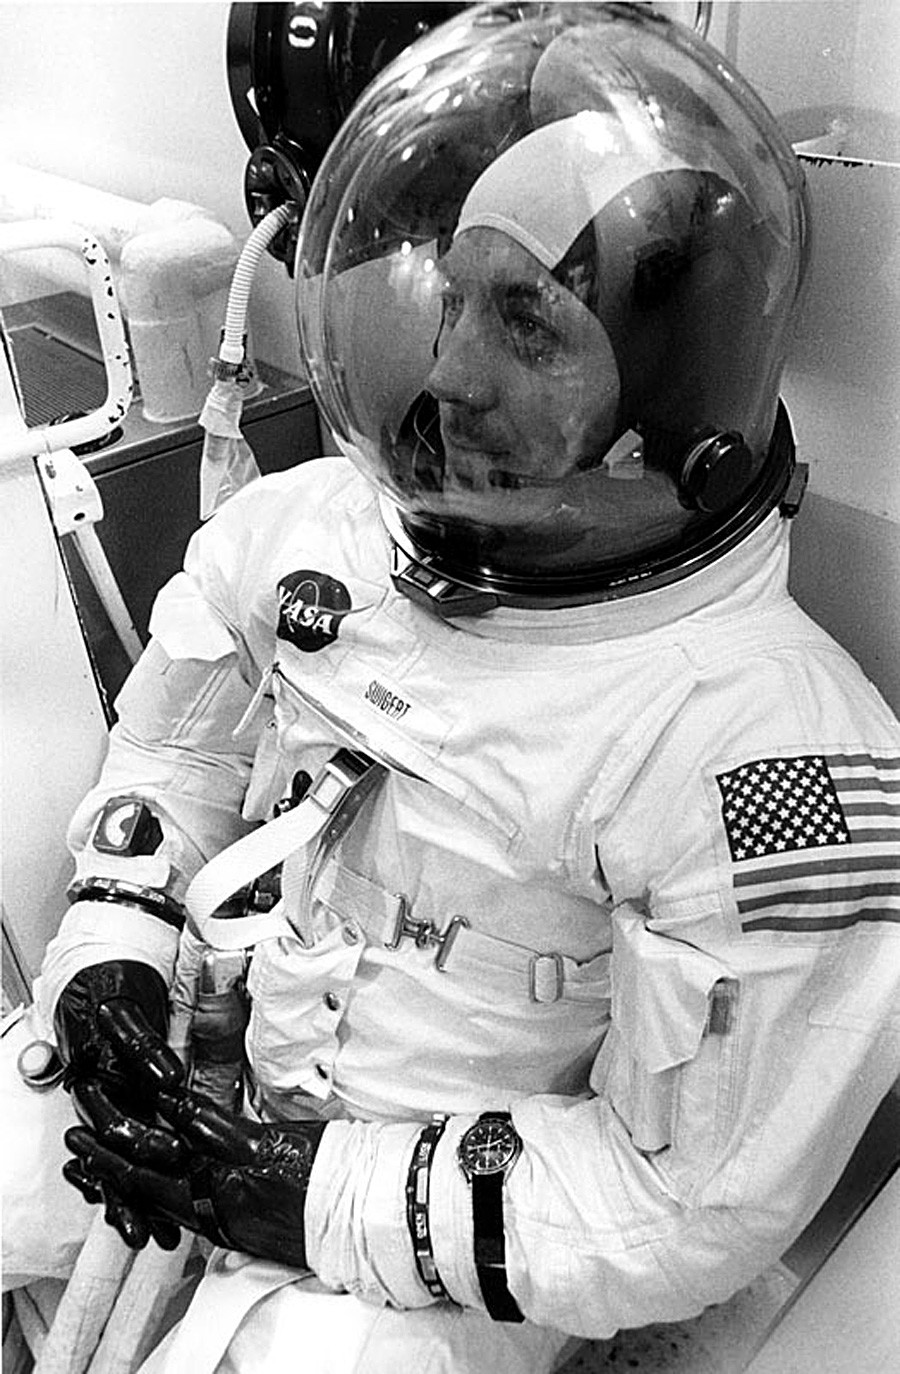 American astronaut Jack Swigert photographed during the Apollo 13 prelaunch countdown, on April 11, 1970, wearing an Omega watch. 